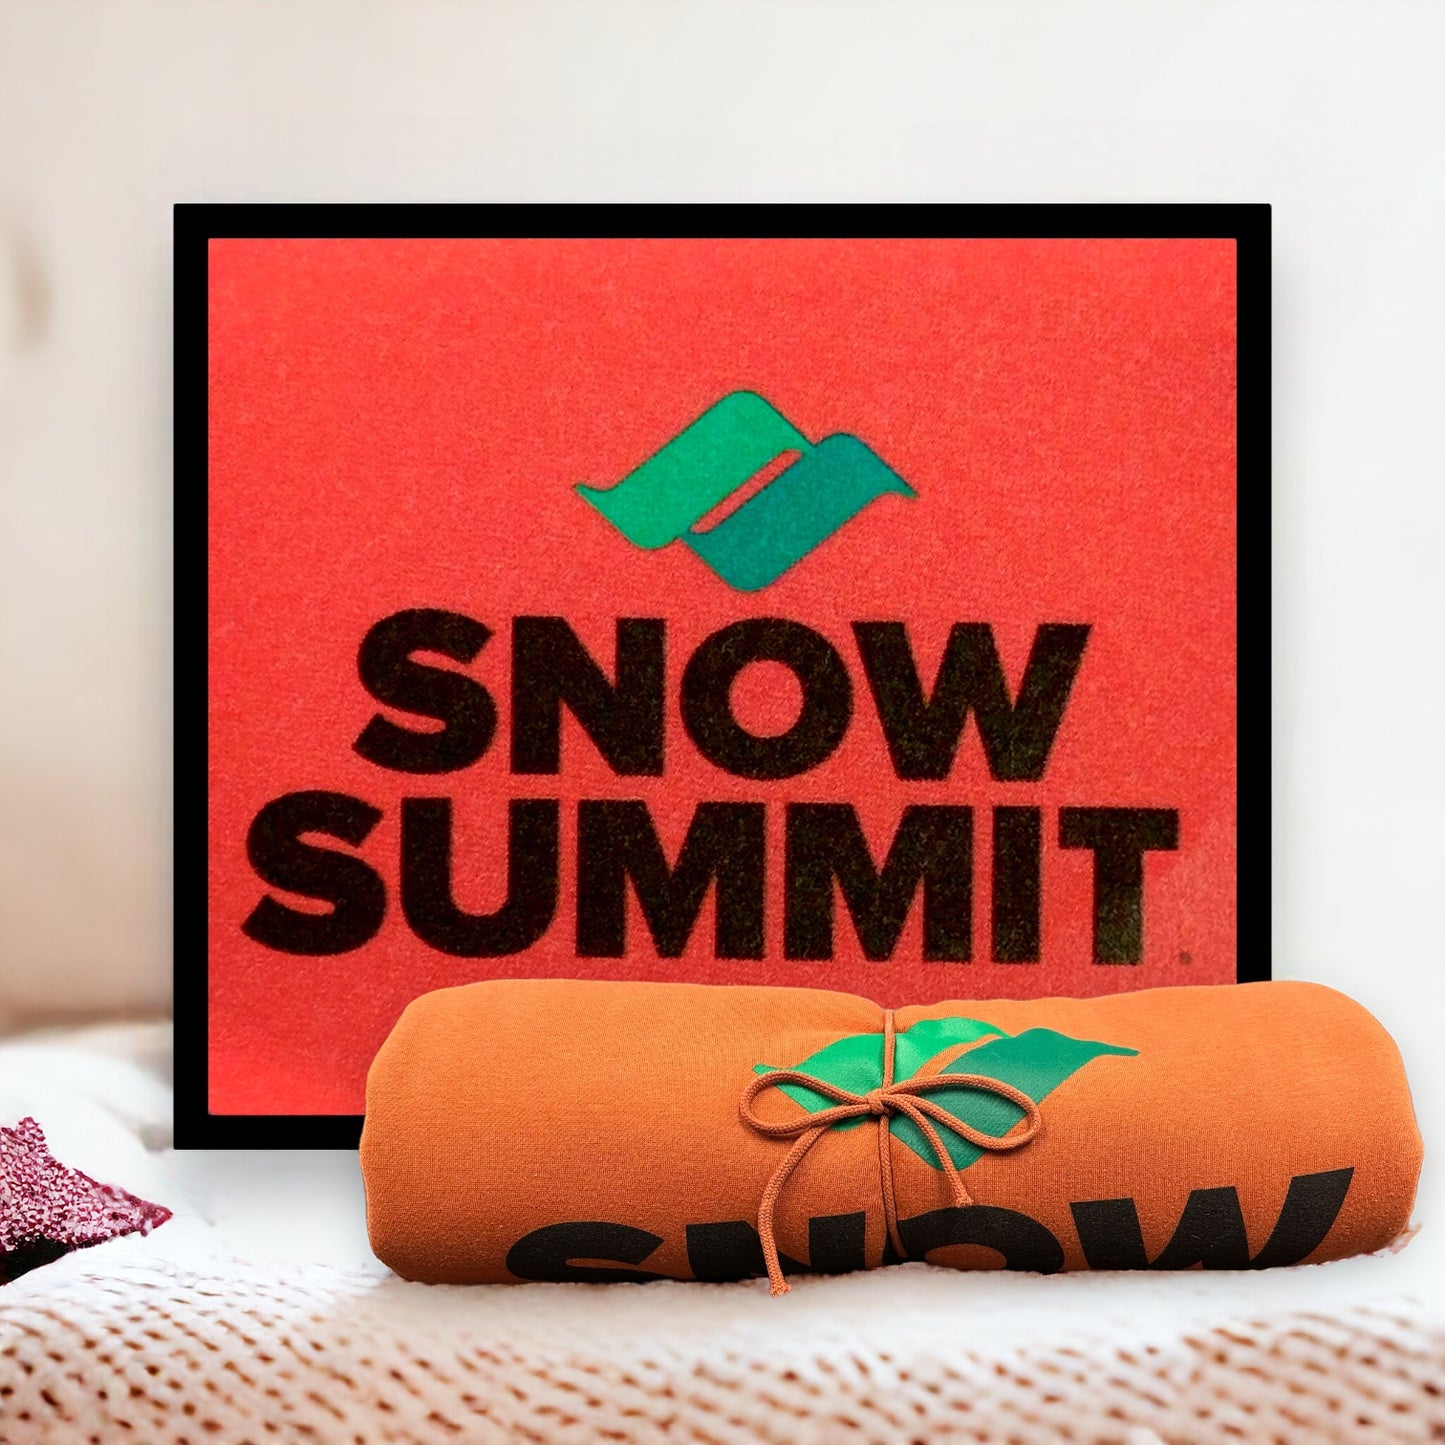 Orange blanket with Snow Summit logo in black and green